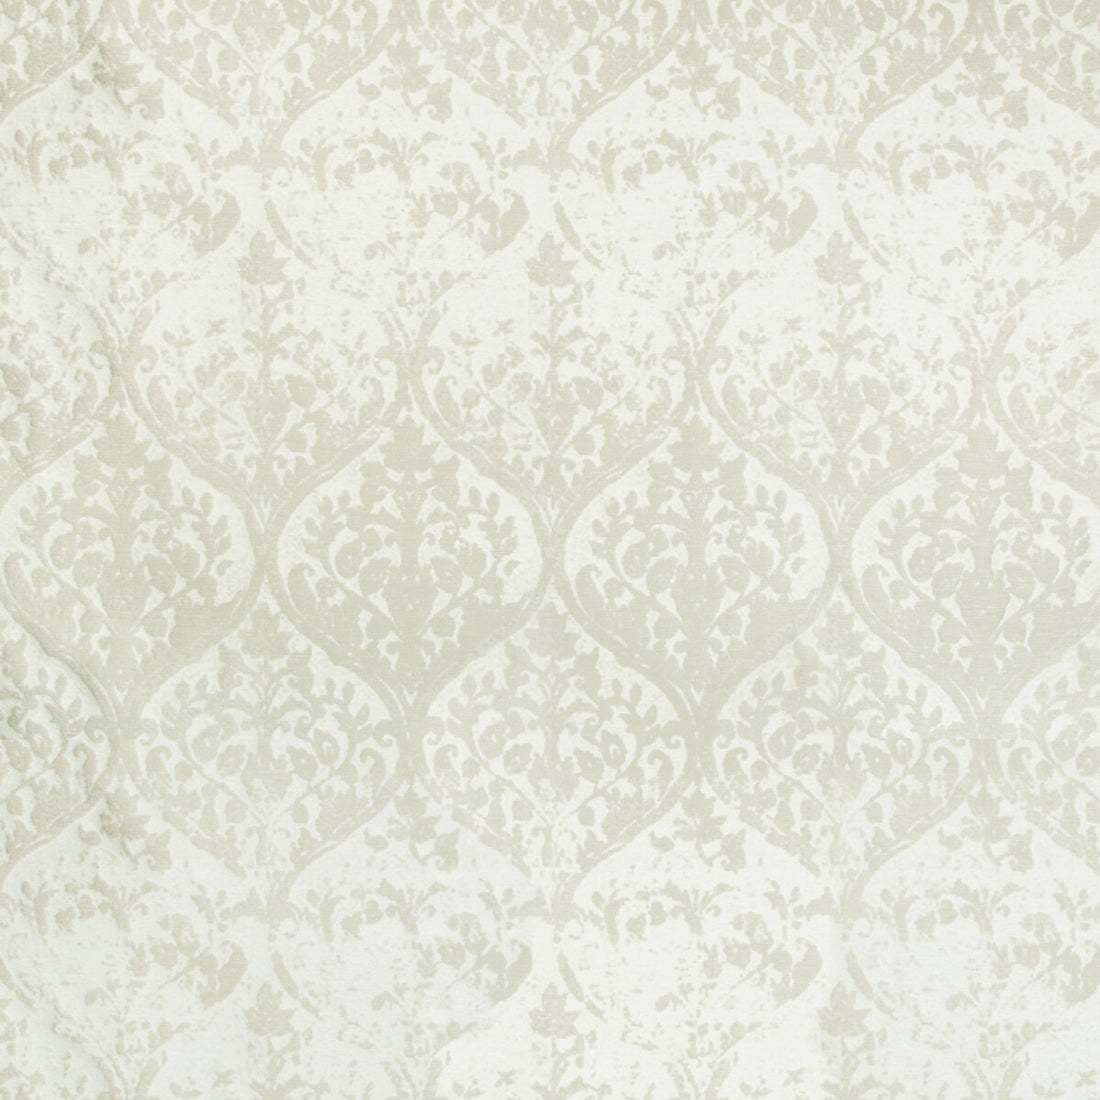 Worn In fabric in linen color - pattern 34917.11.0 - by Kravet Couture in the Modern Tailor collection